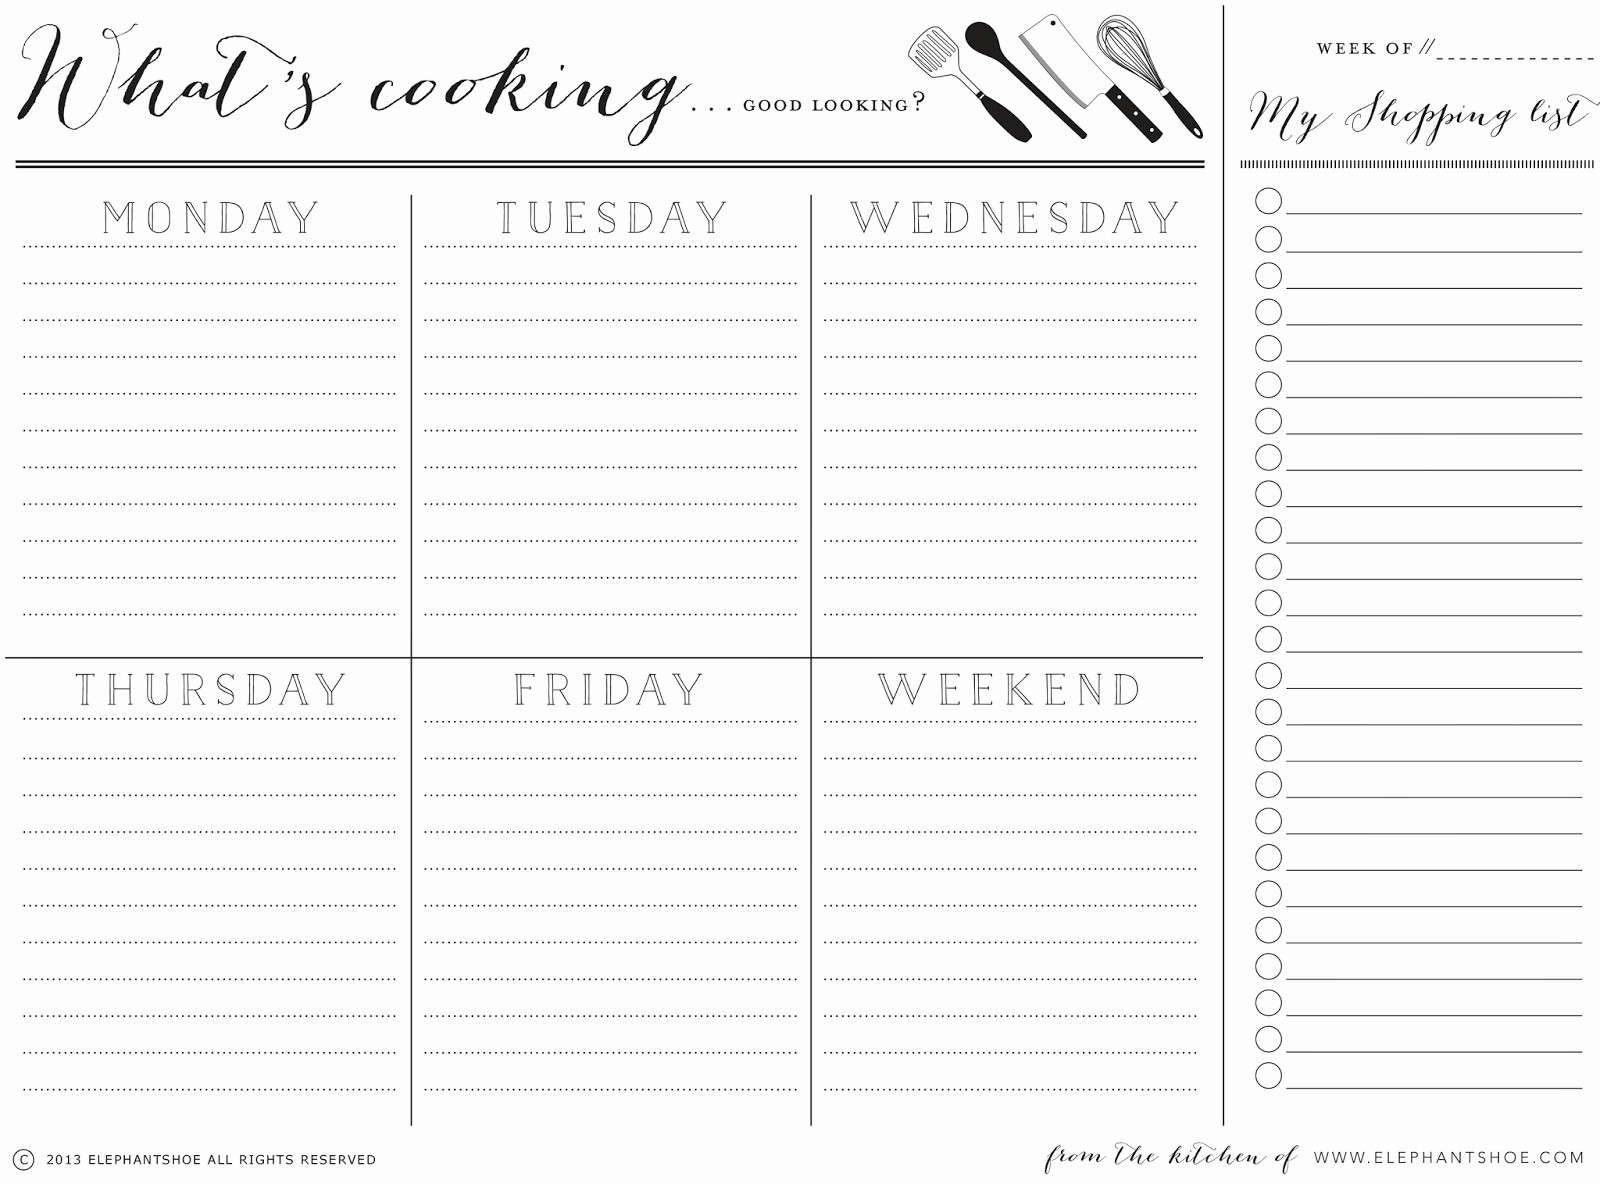 7 Day Weekly Planner Template New 6 Best Of by Day Dinner Menu Planner Printable 7